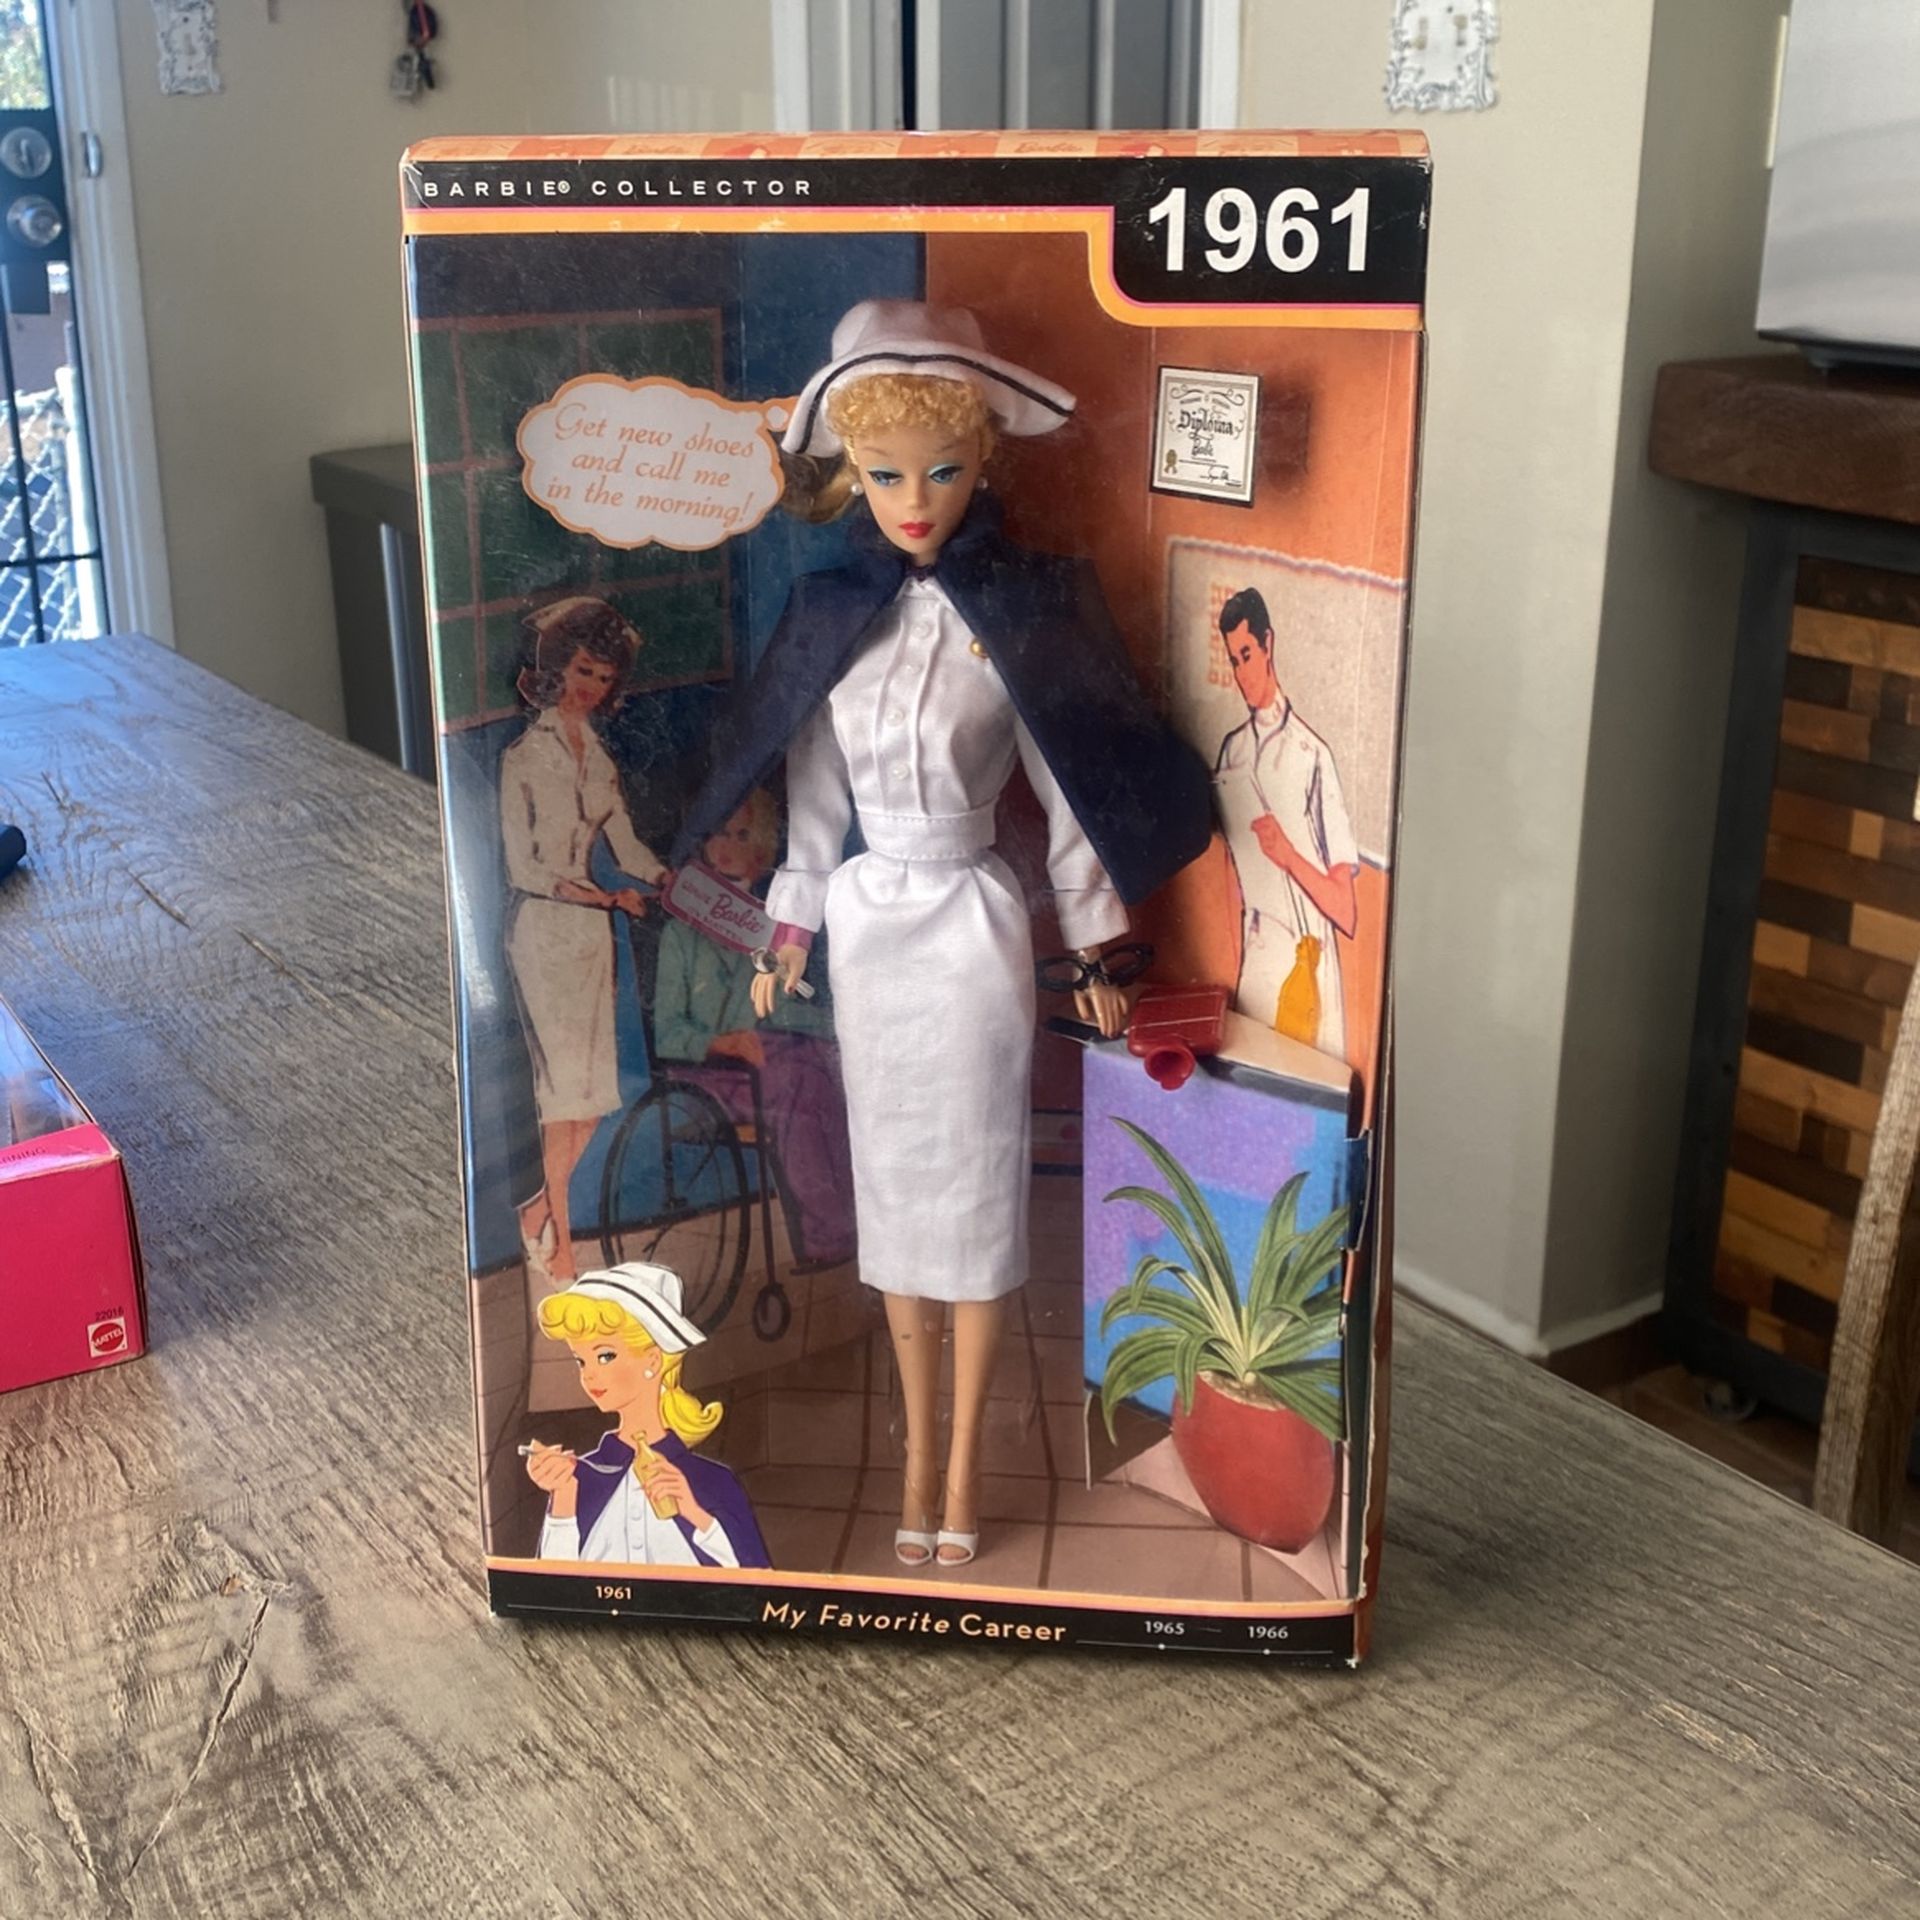 1961 Barbie collection for Sale in Lincoln Acres, CA - OfferUp